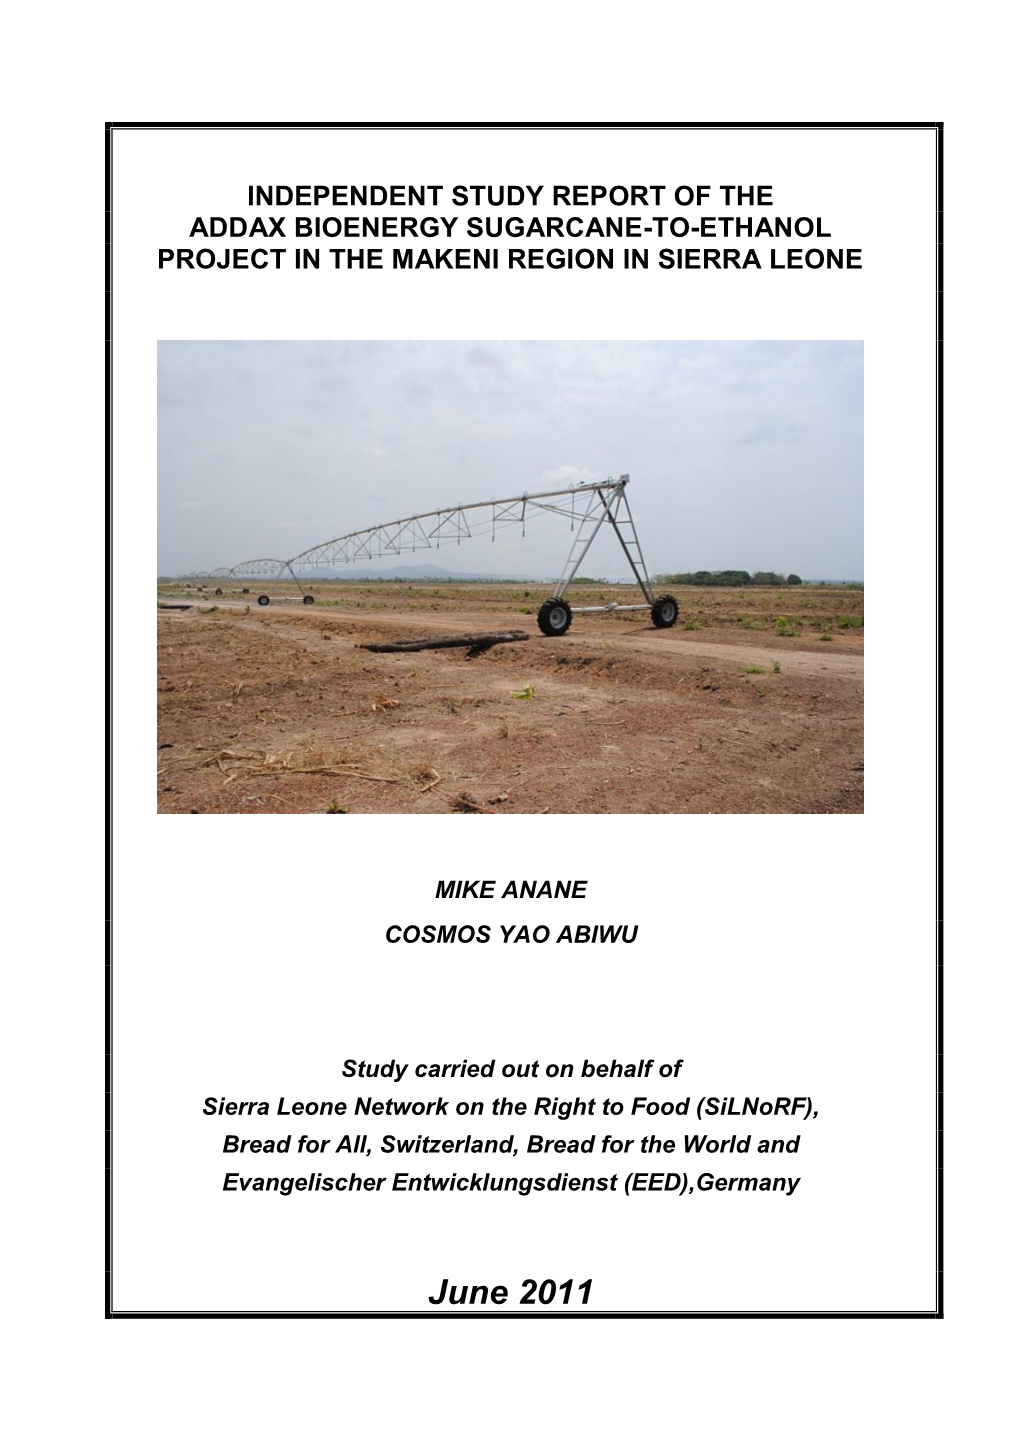 Independent Study Report of the Addax Bioenergy Sugarcane-To-Ethanol Project in the Makeni Region in Sierra Leone